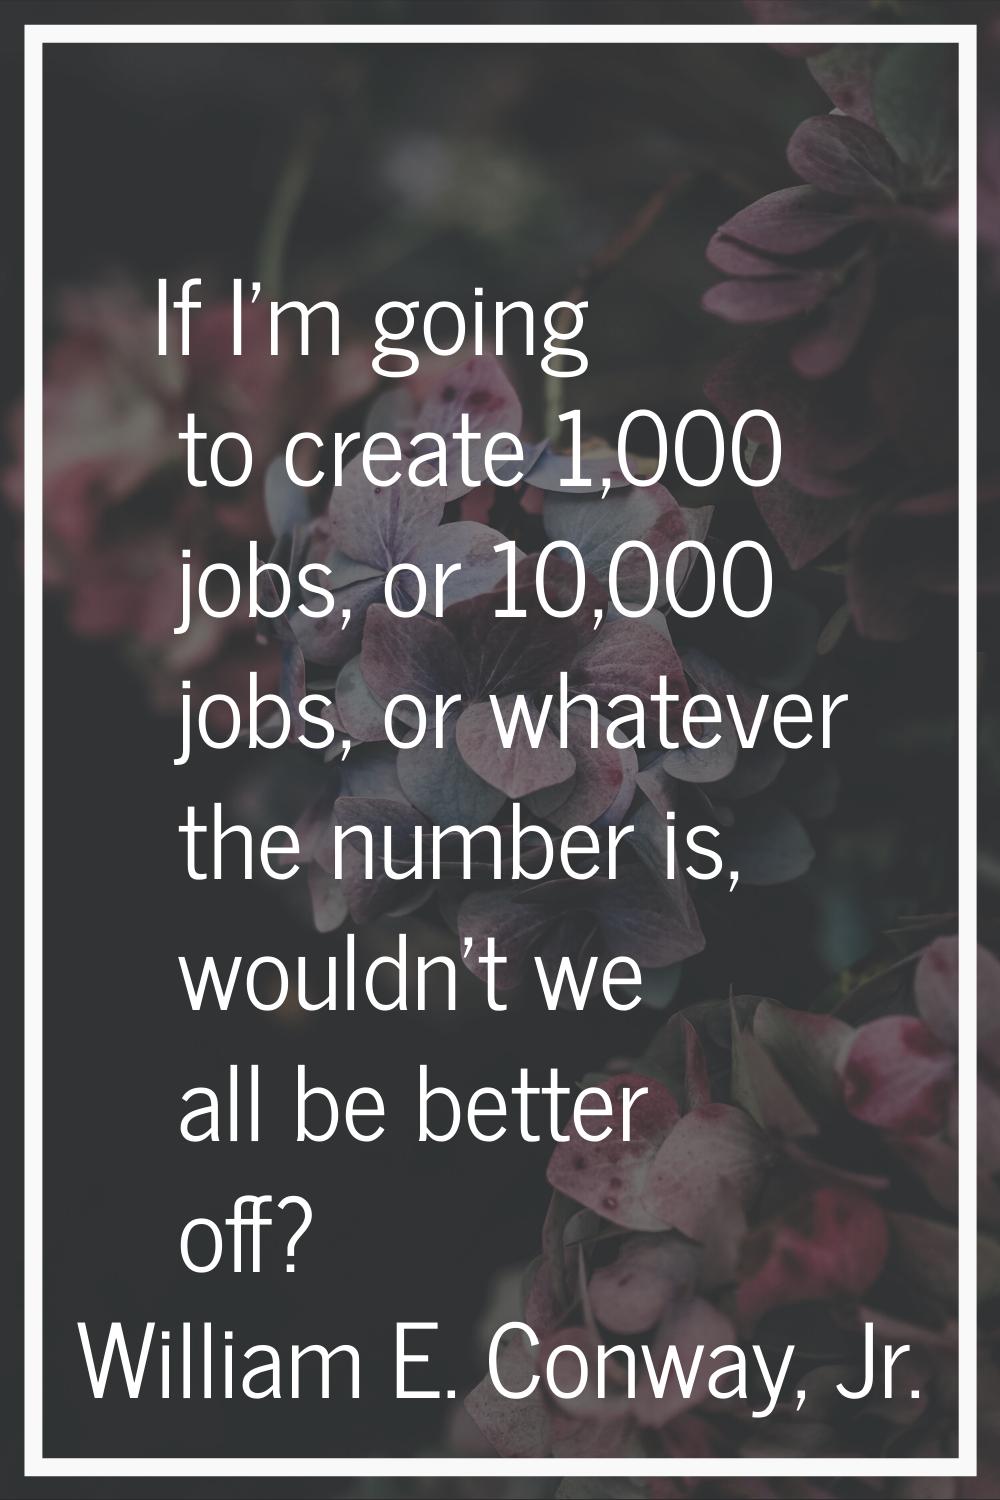 If I'm going to create 1,000 jobs, or 10,000 jobs, or whatever the number is, wouldn't we all be be